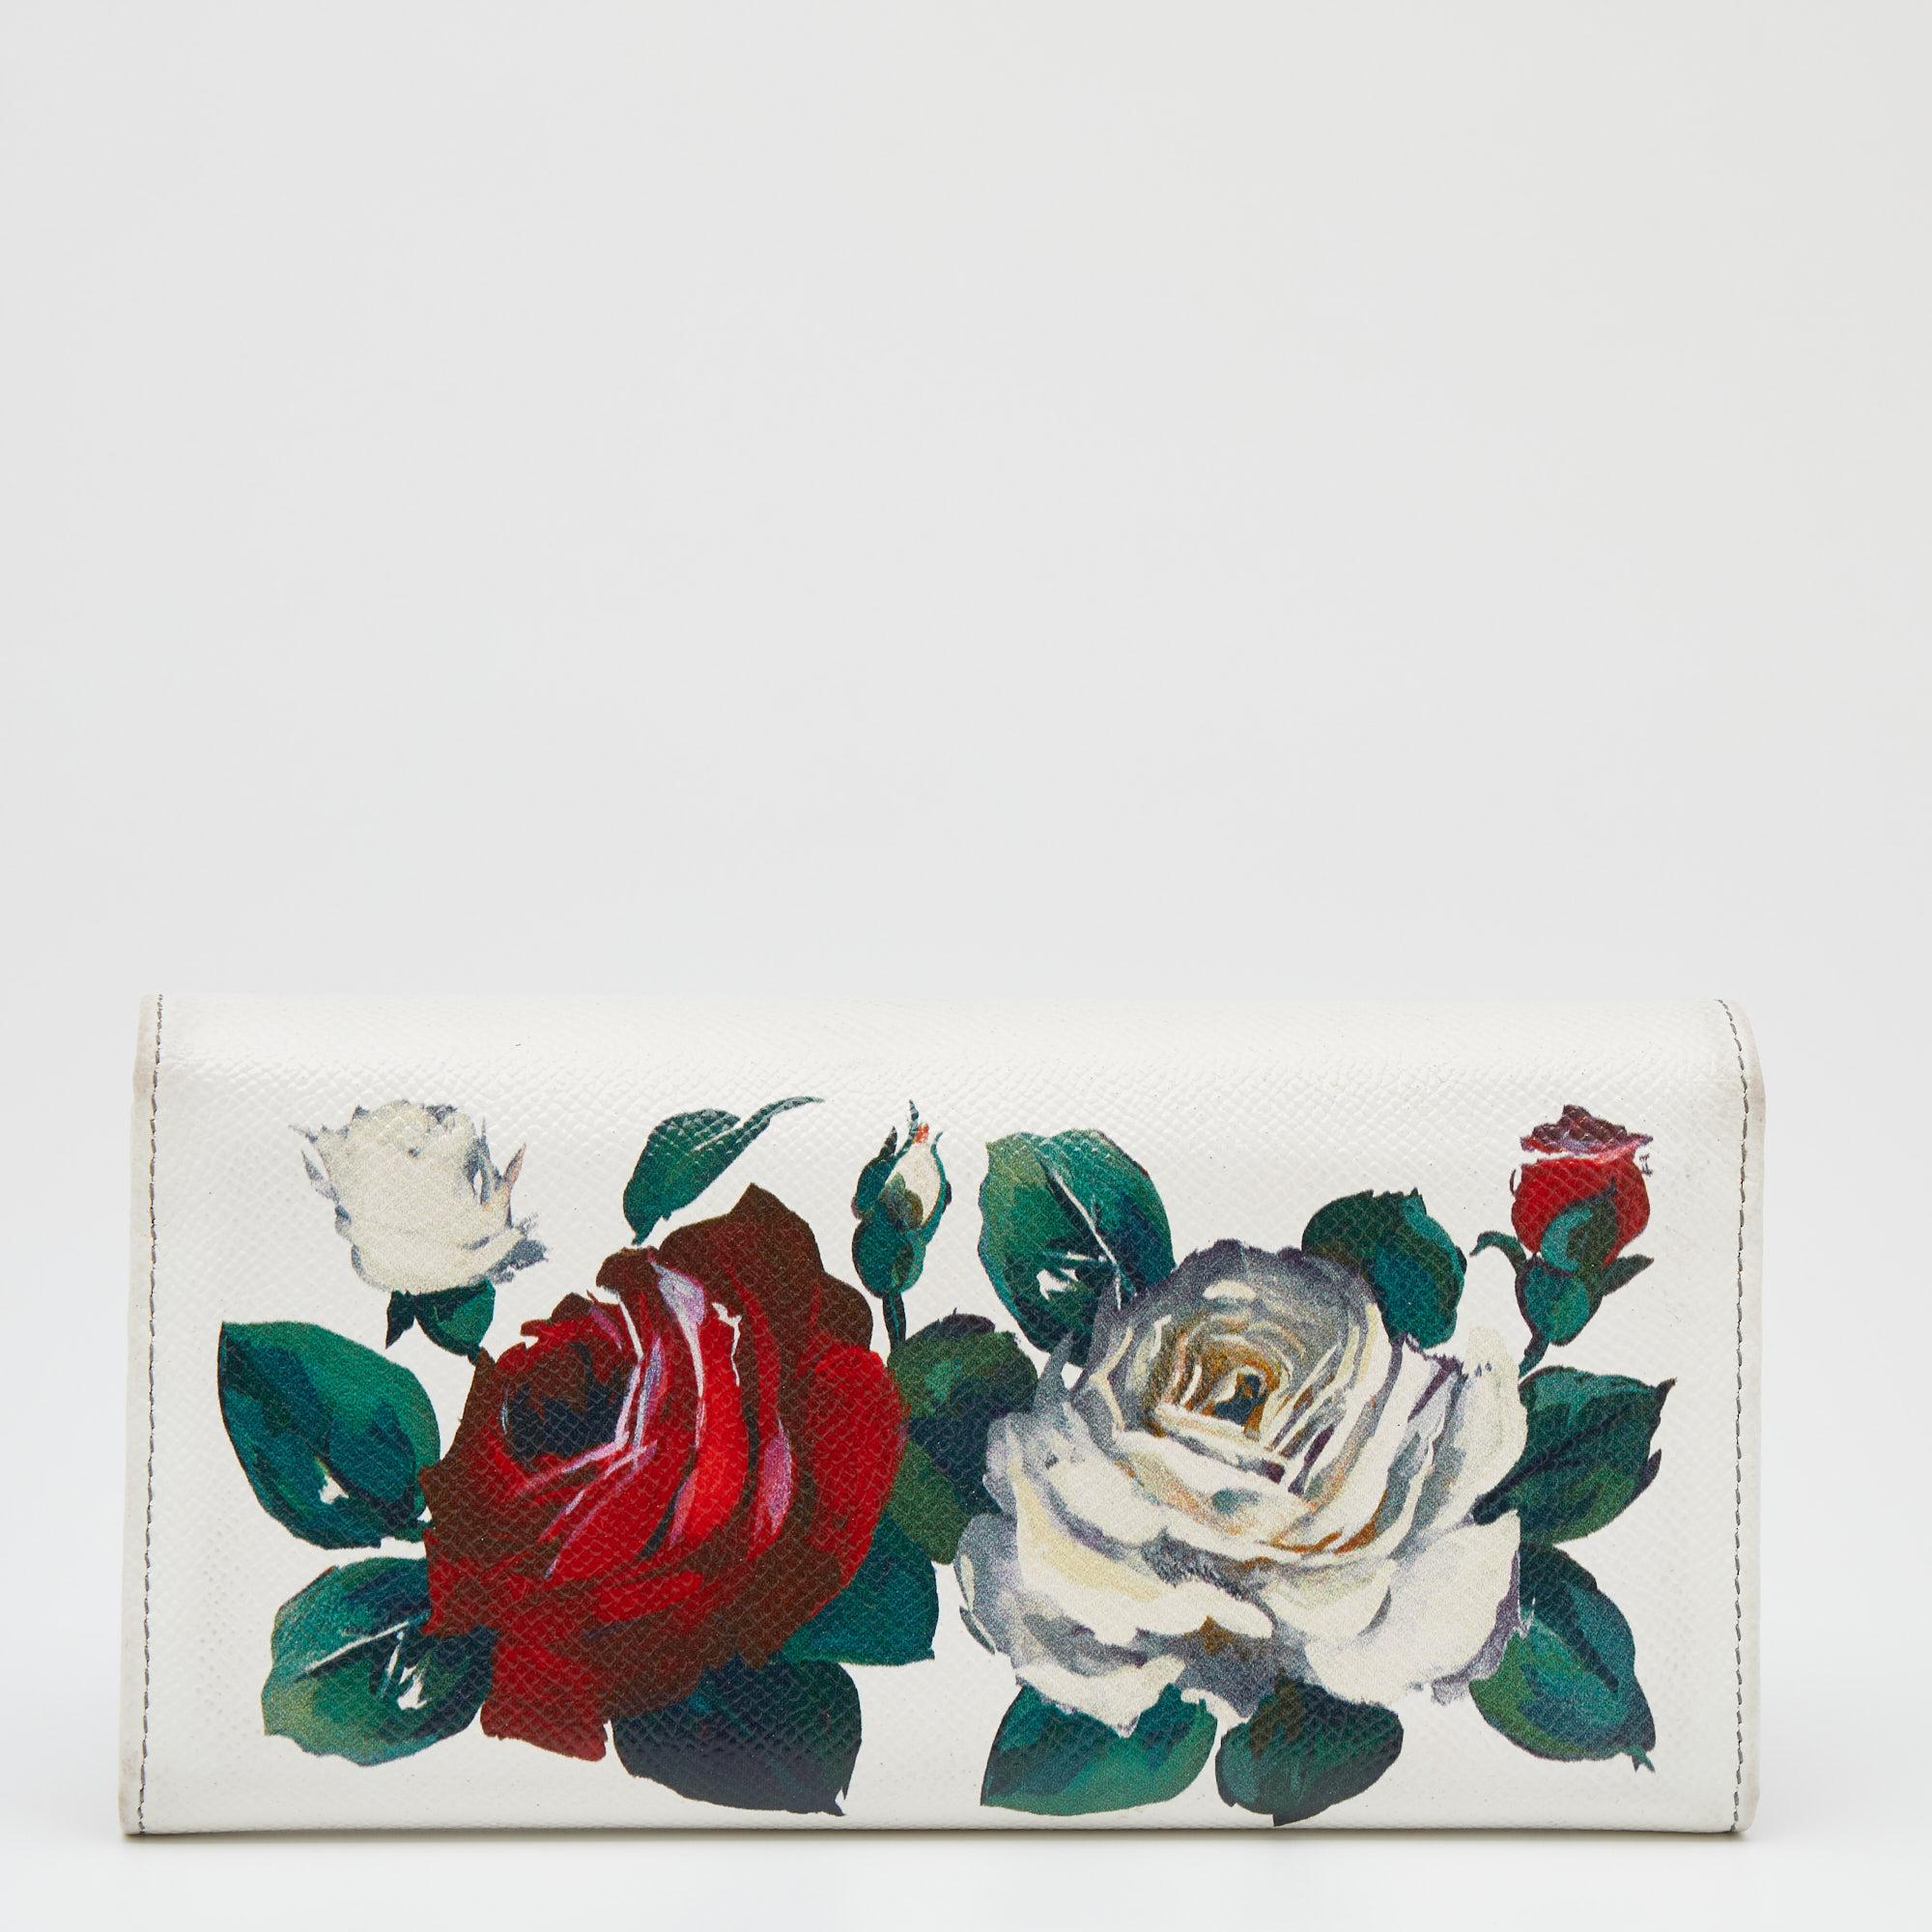 Carry this Dolce & Gabbana continental wallet in style! It is crafted from leather and has a white hue with a lovely floral print. The pretty wallet is complete with a front flap that opens to several compartments that can easily hold your cards.